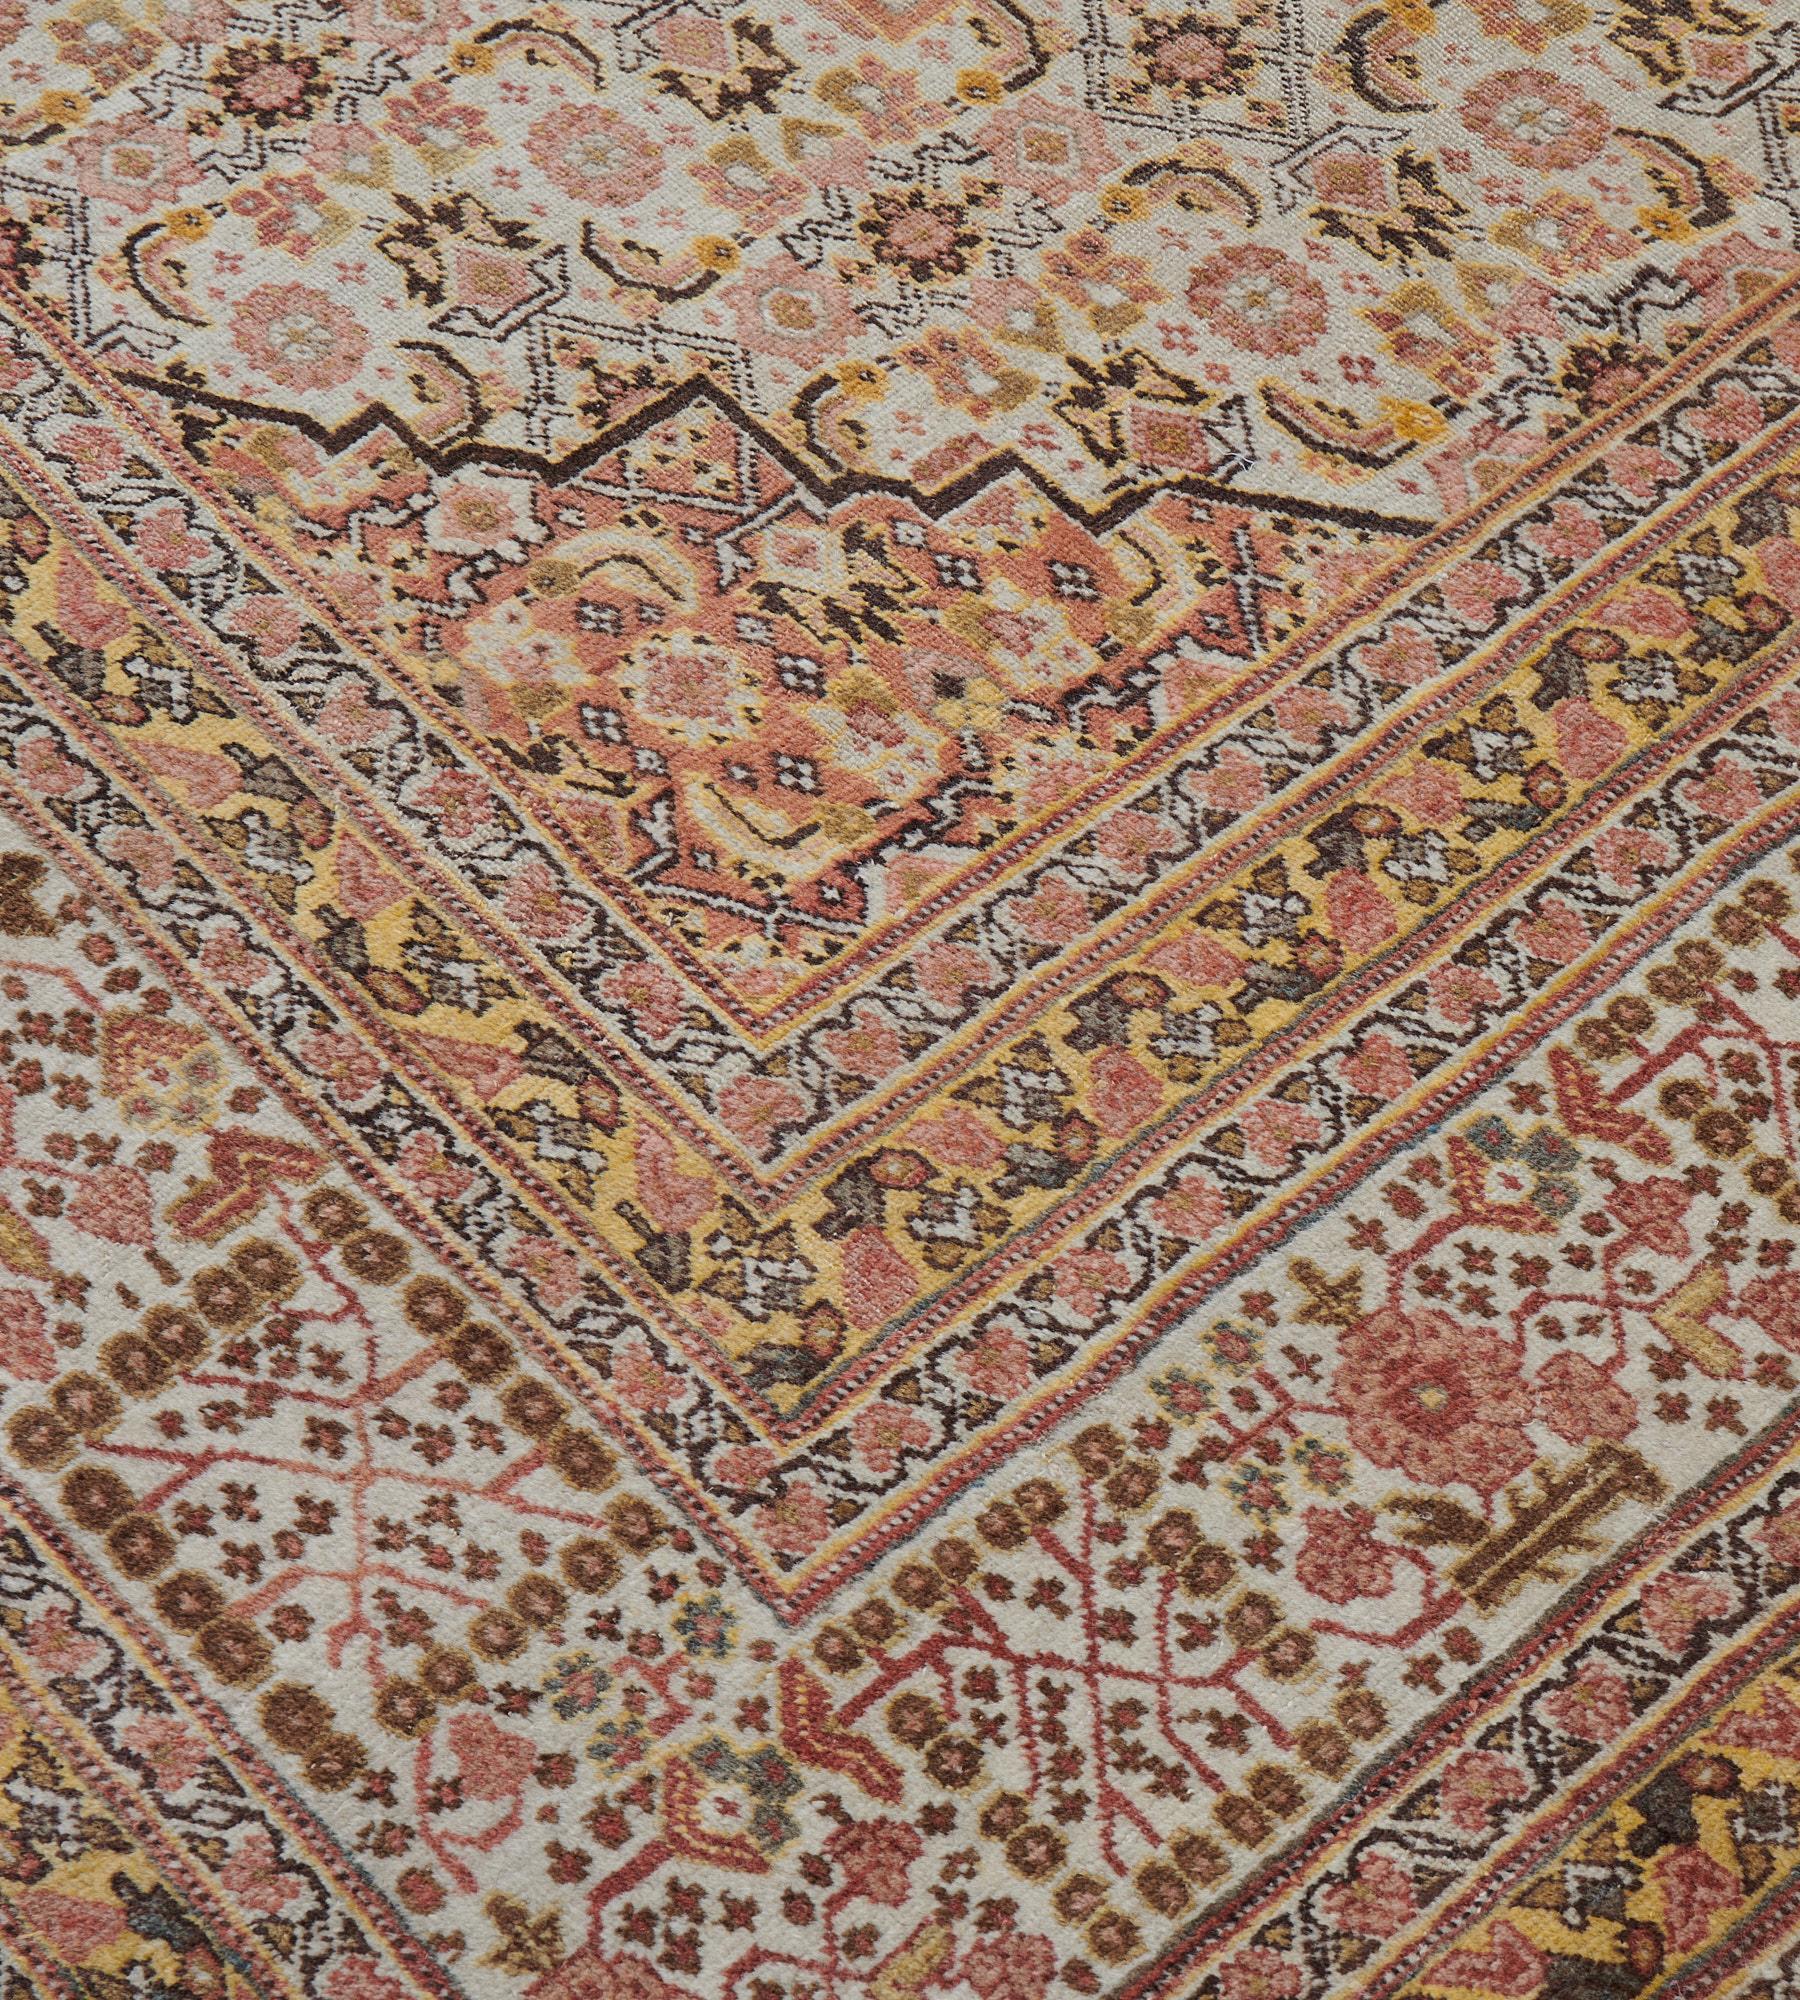 This traditional hand-woven Persian Tabriz rug has a refined ivory herati field interrupted by a stylized arabesque floral sub-field, enclosing a rust red arabesque lozenge medallion and with similar quarter spandrels, in a complementary dense